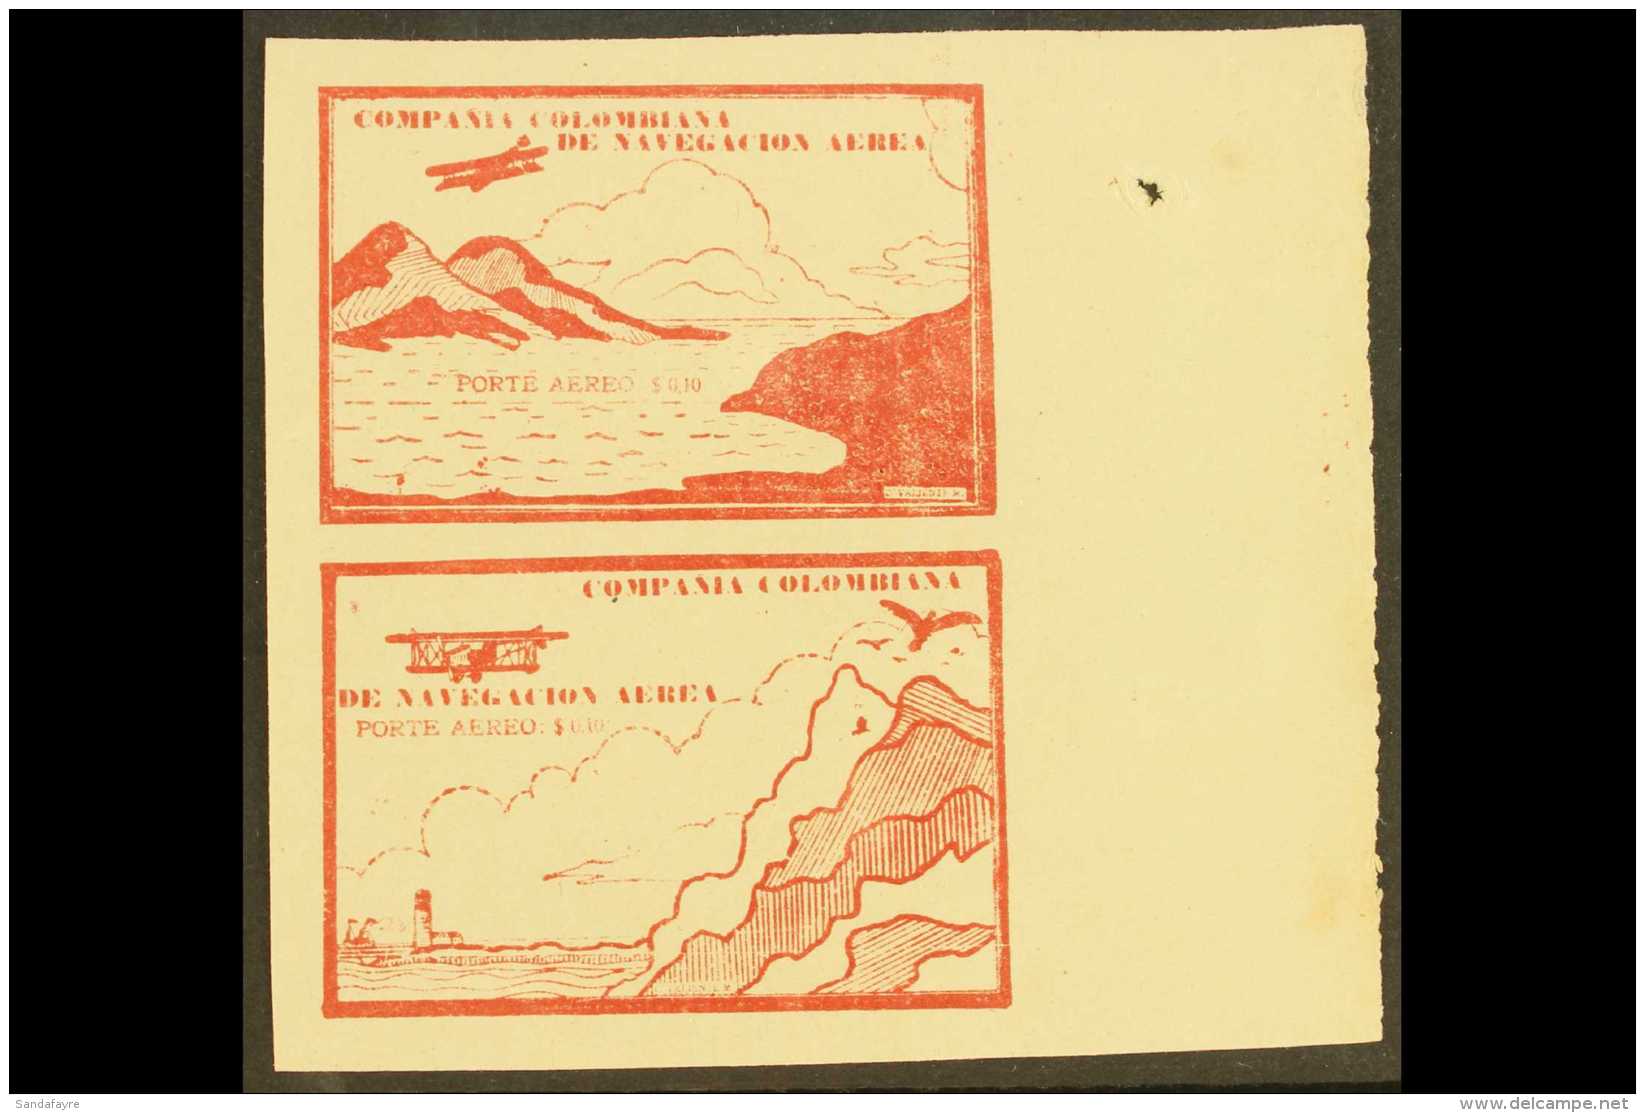 PRIVATE AIRS - COMPANIA COLOMBIANA DE NAVEGACION AREA 1920 (Oct) 10c Brown-red "Sea And Mountains" And "Cliffs And... - Kolumbien